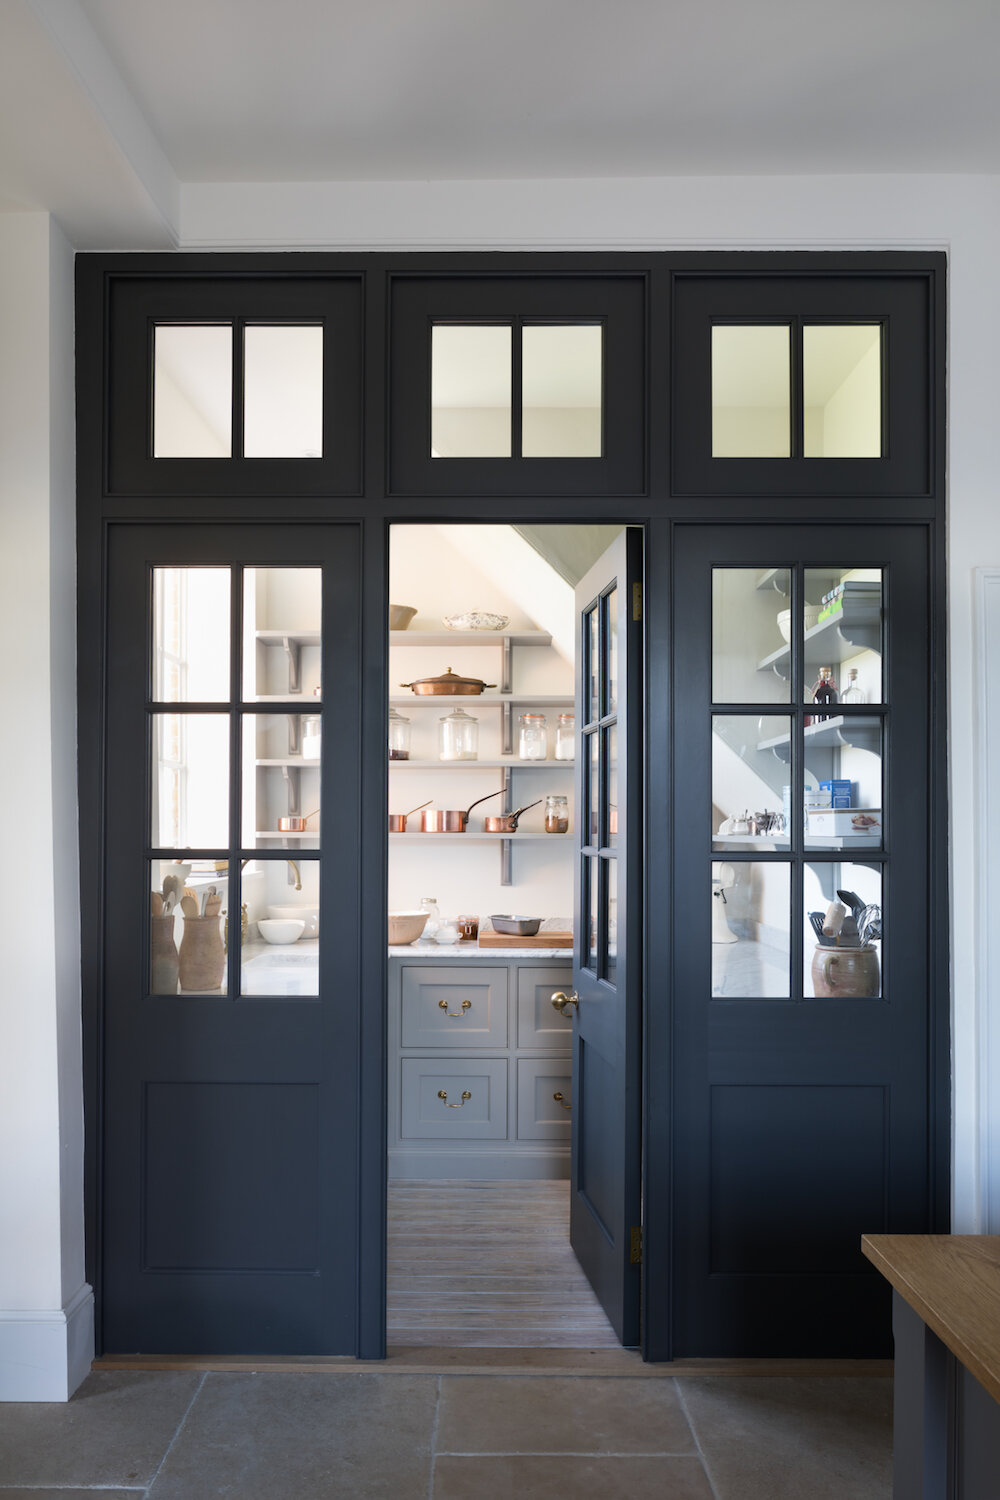 Pantry Room Entrance Door Yes Or No